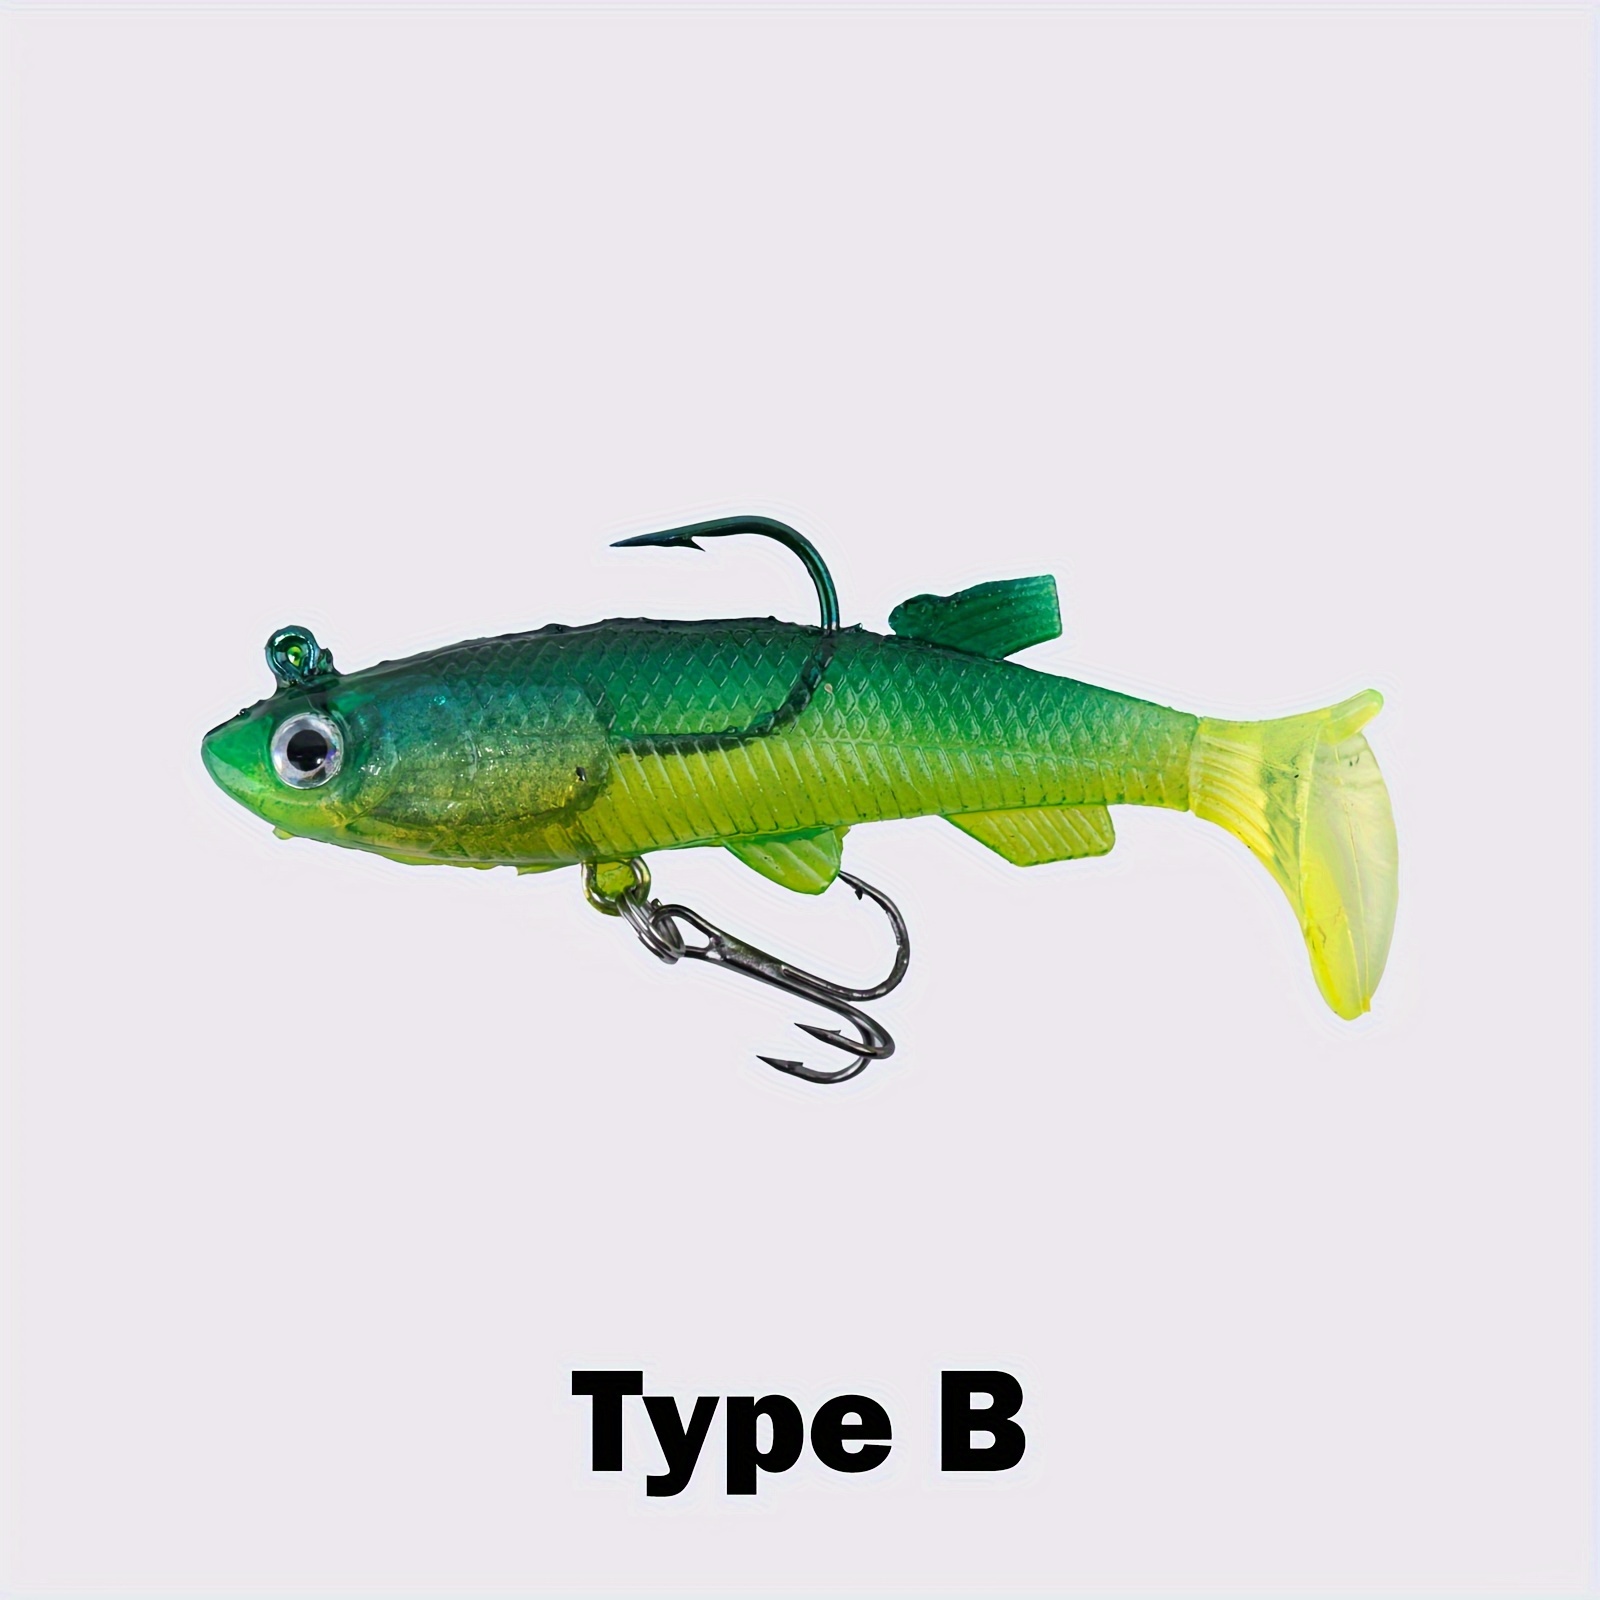  SHOWYEE Fishing Soft Lure, Pre-Rigged Jig Head Soft Paddle  Tail Swimbaits, Sinking Fishing Jigs Lures for Saltwater Freshwater, Trout  Crappie Pike Bass : Sports & Outdoors